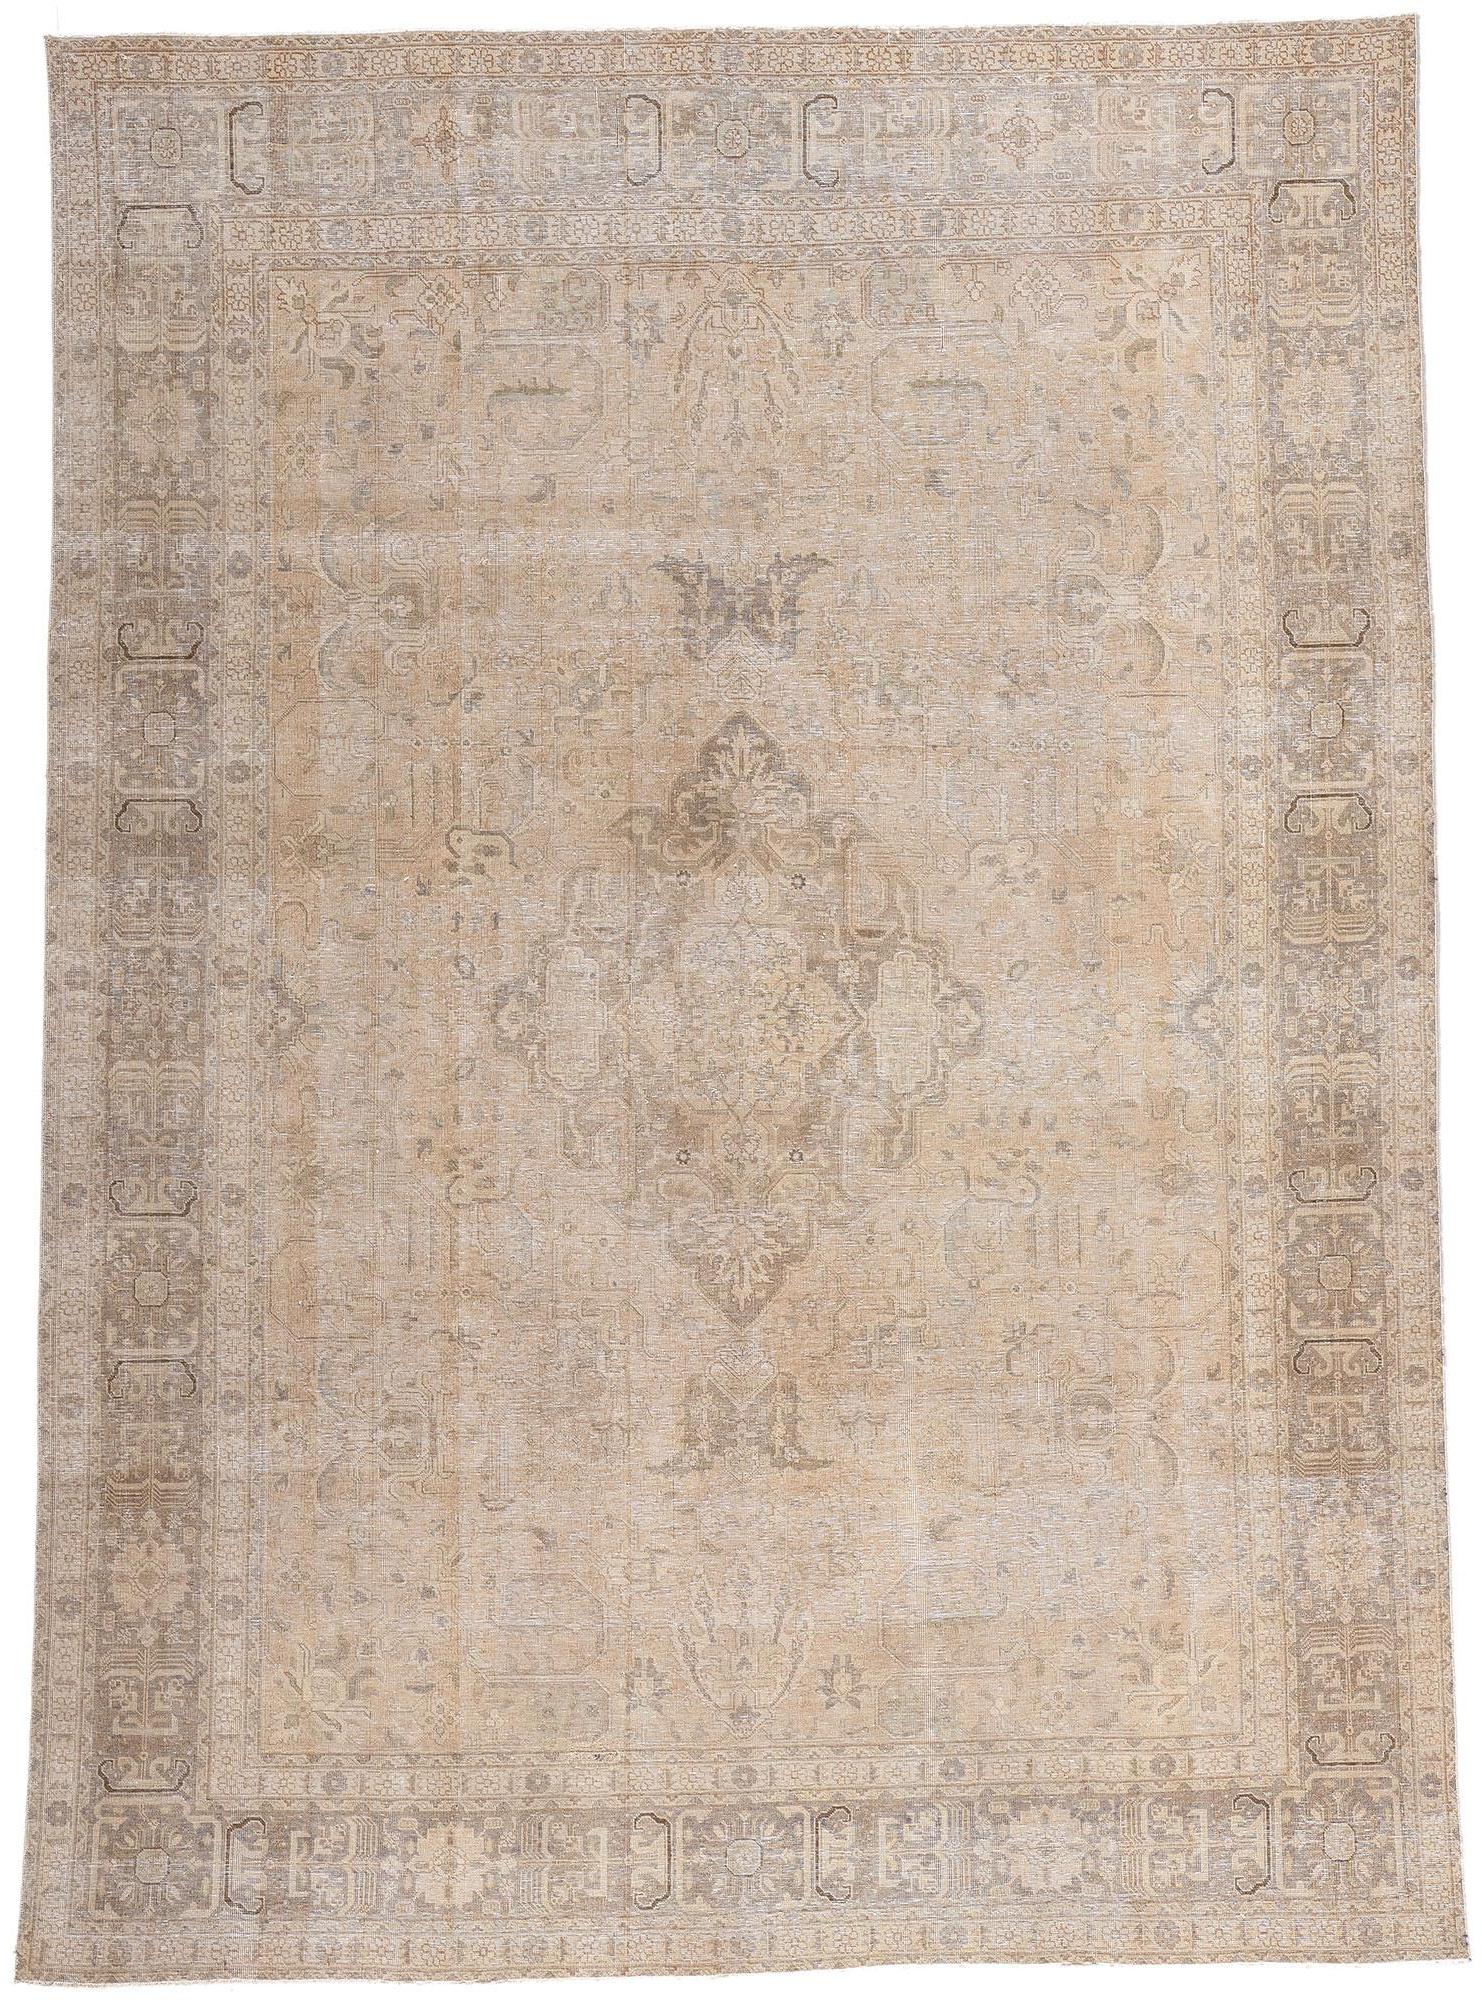 Antique-Worn Persian Tabrz Rug, Weathered Finesse Meets Tonal Elegance